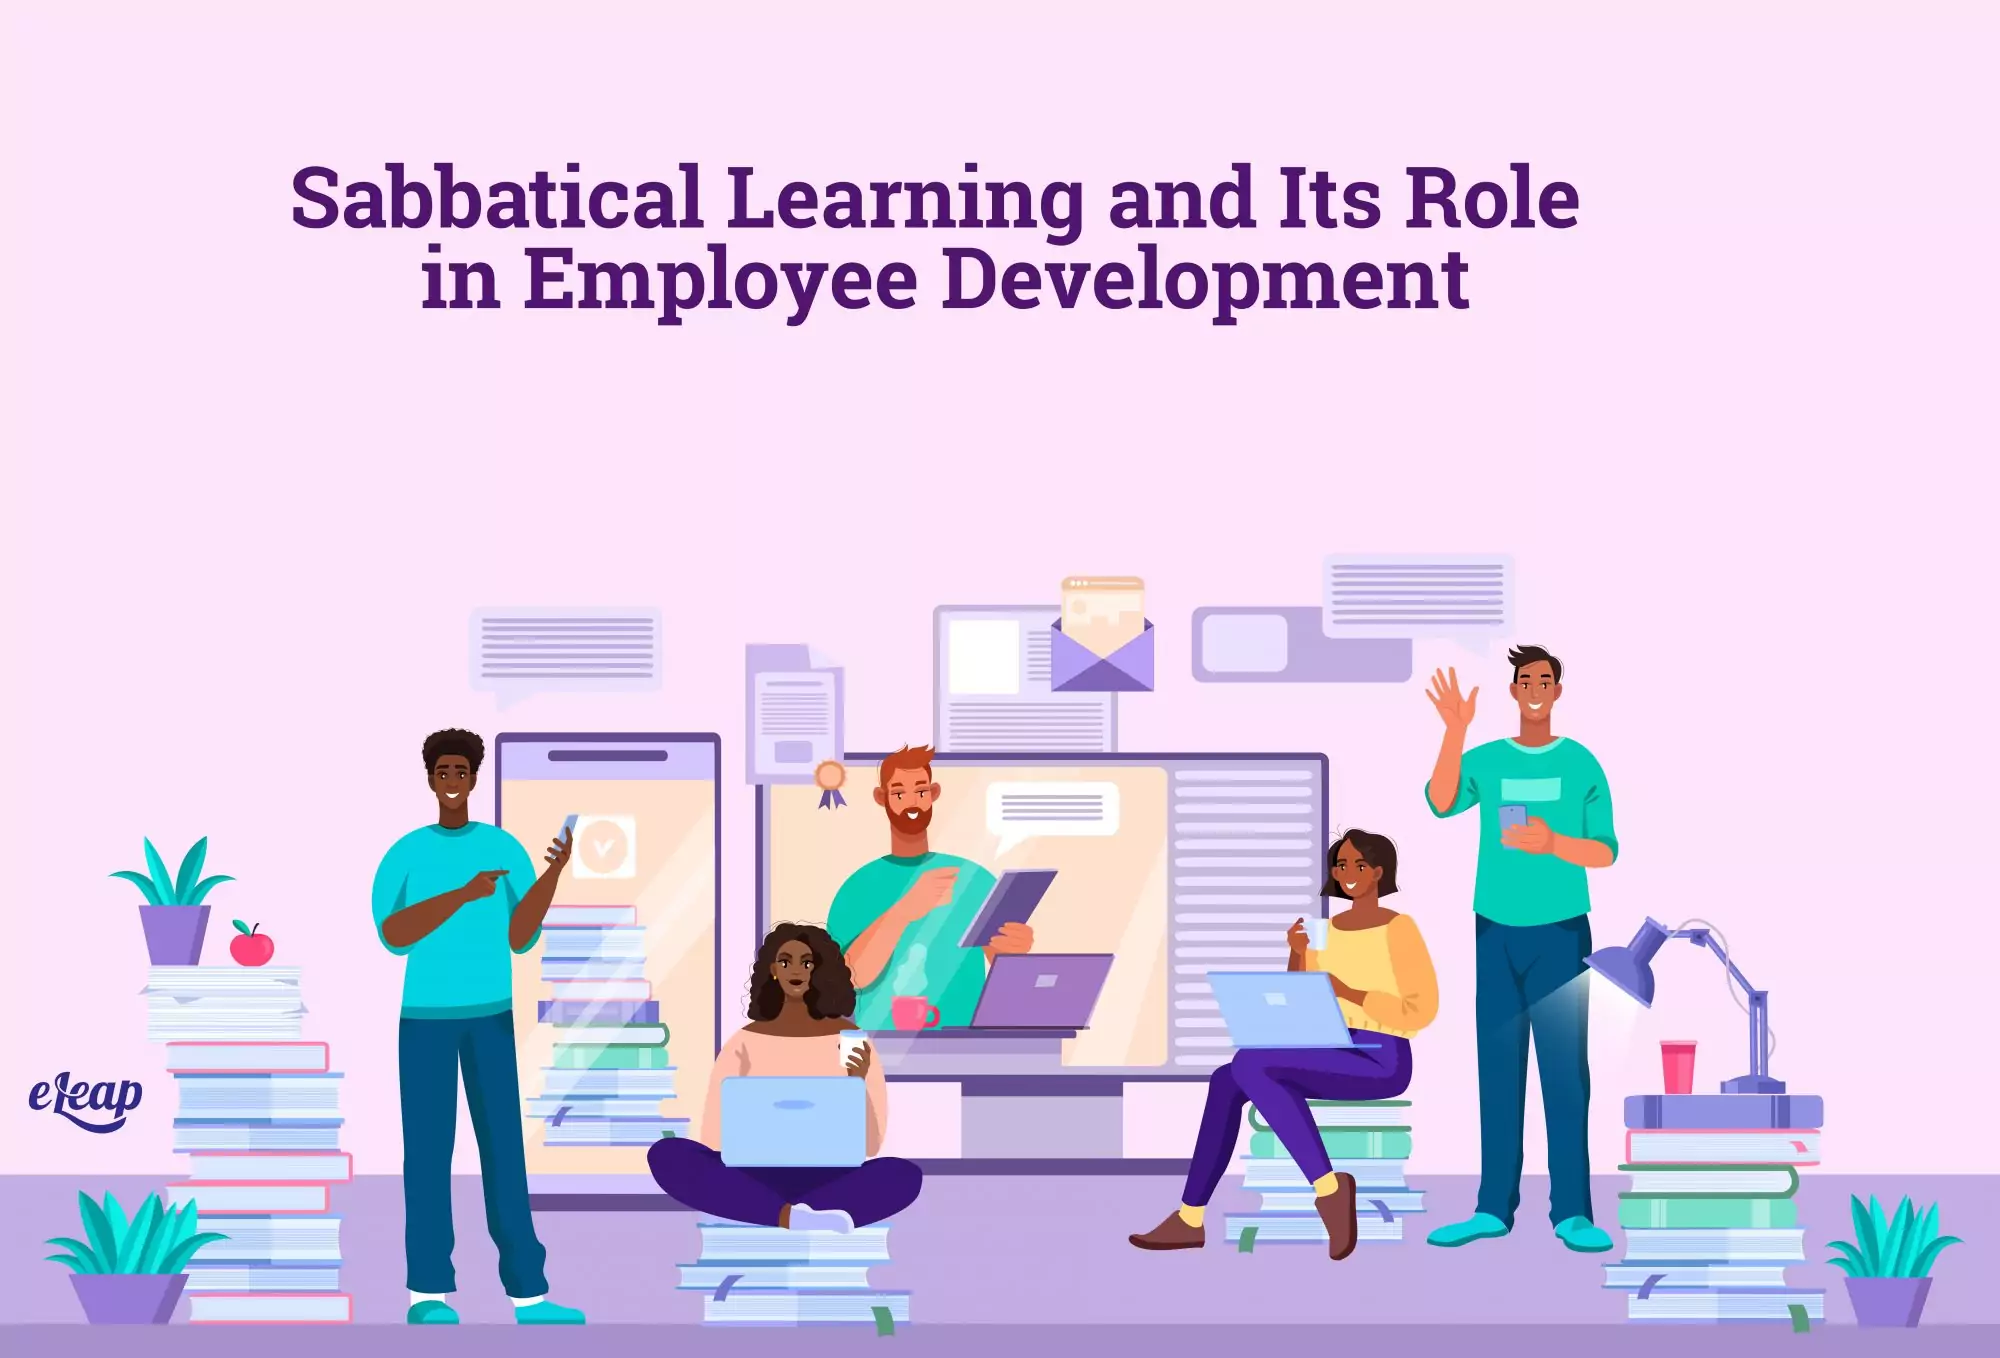 Sabbatical Learning and Its Role in Employee Development